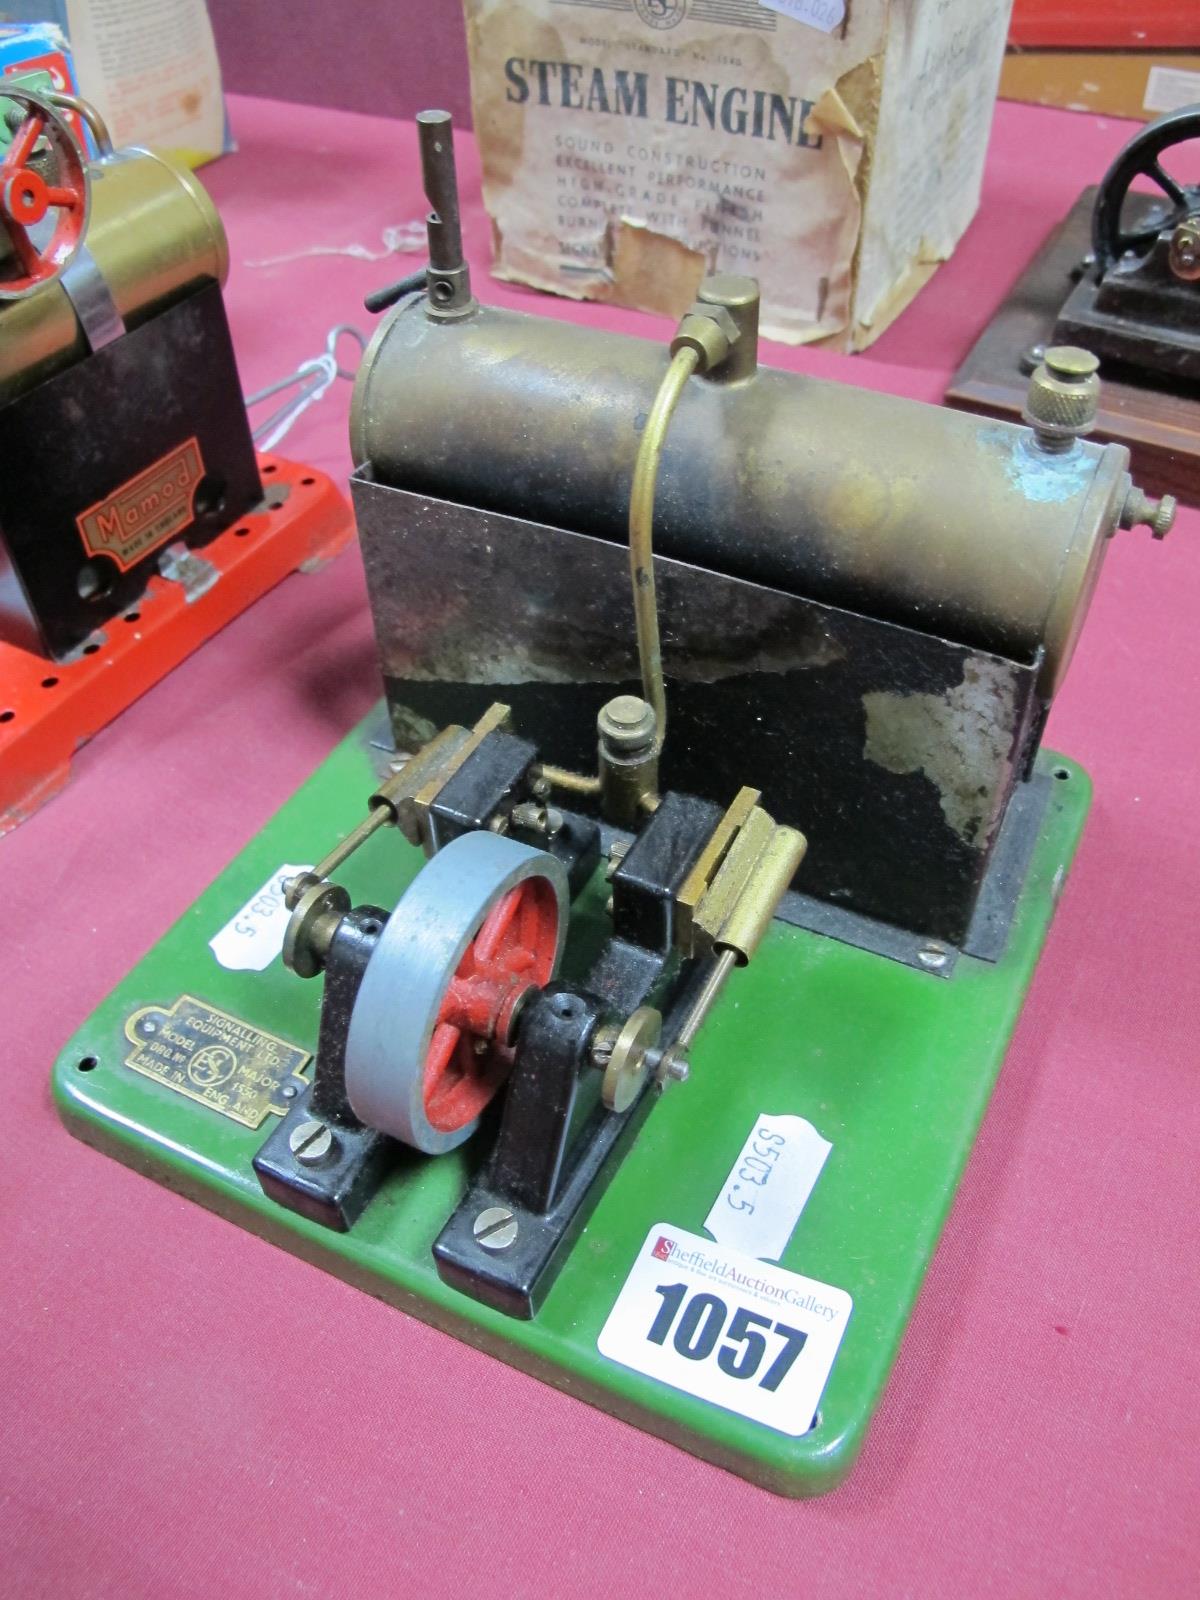 A "Signalling Equipment" Live Steam Model "Major 1550" Twin Cylinder